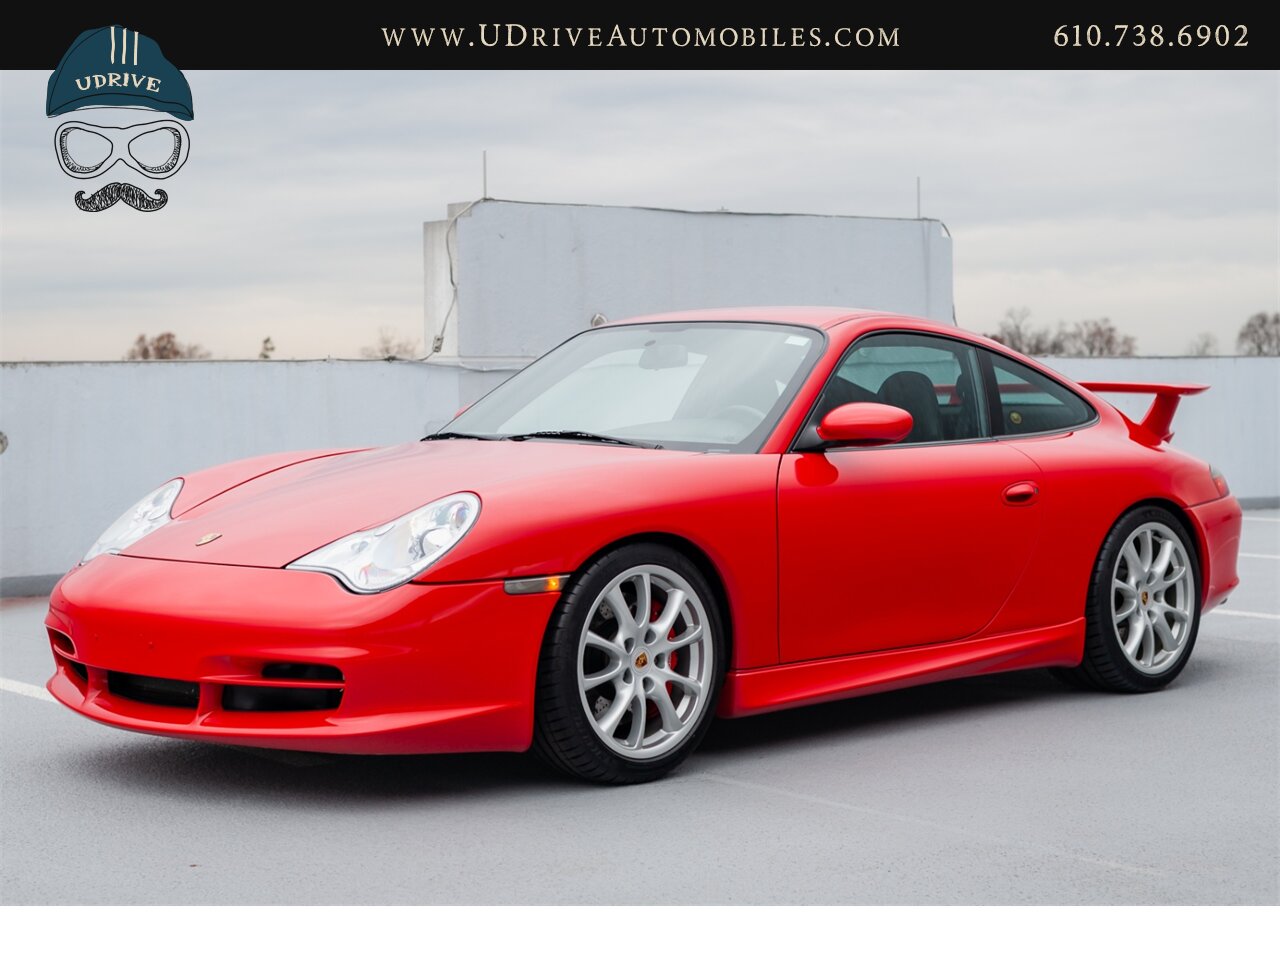 2004 Porsche 911 996 GT3 Guards Red Sport Seats Painted Hardbacks  Painted Center Console 18k Miles - Photo 11 - West Chester, PA 19382